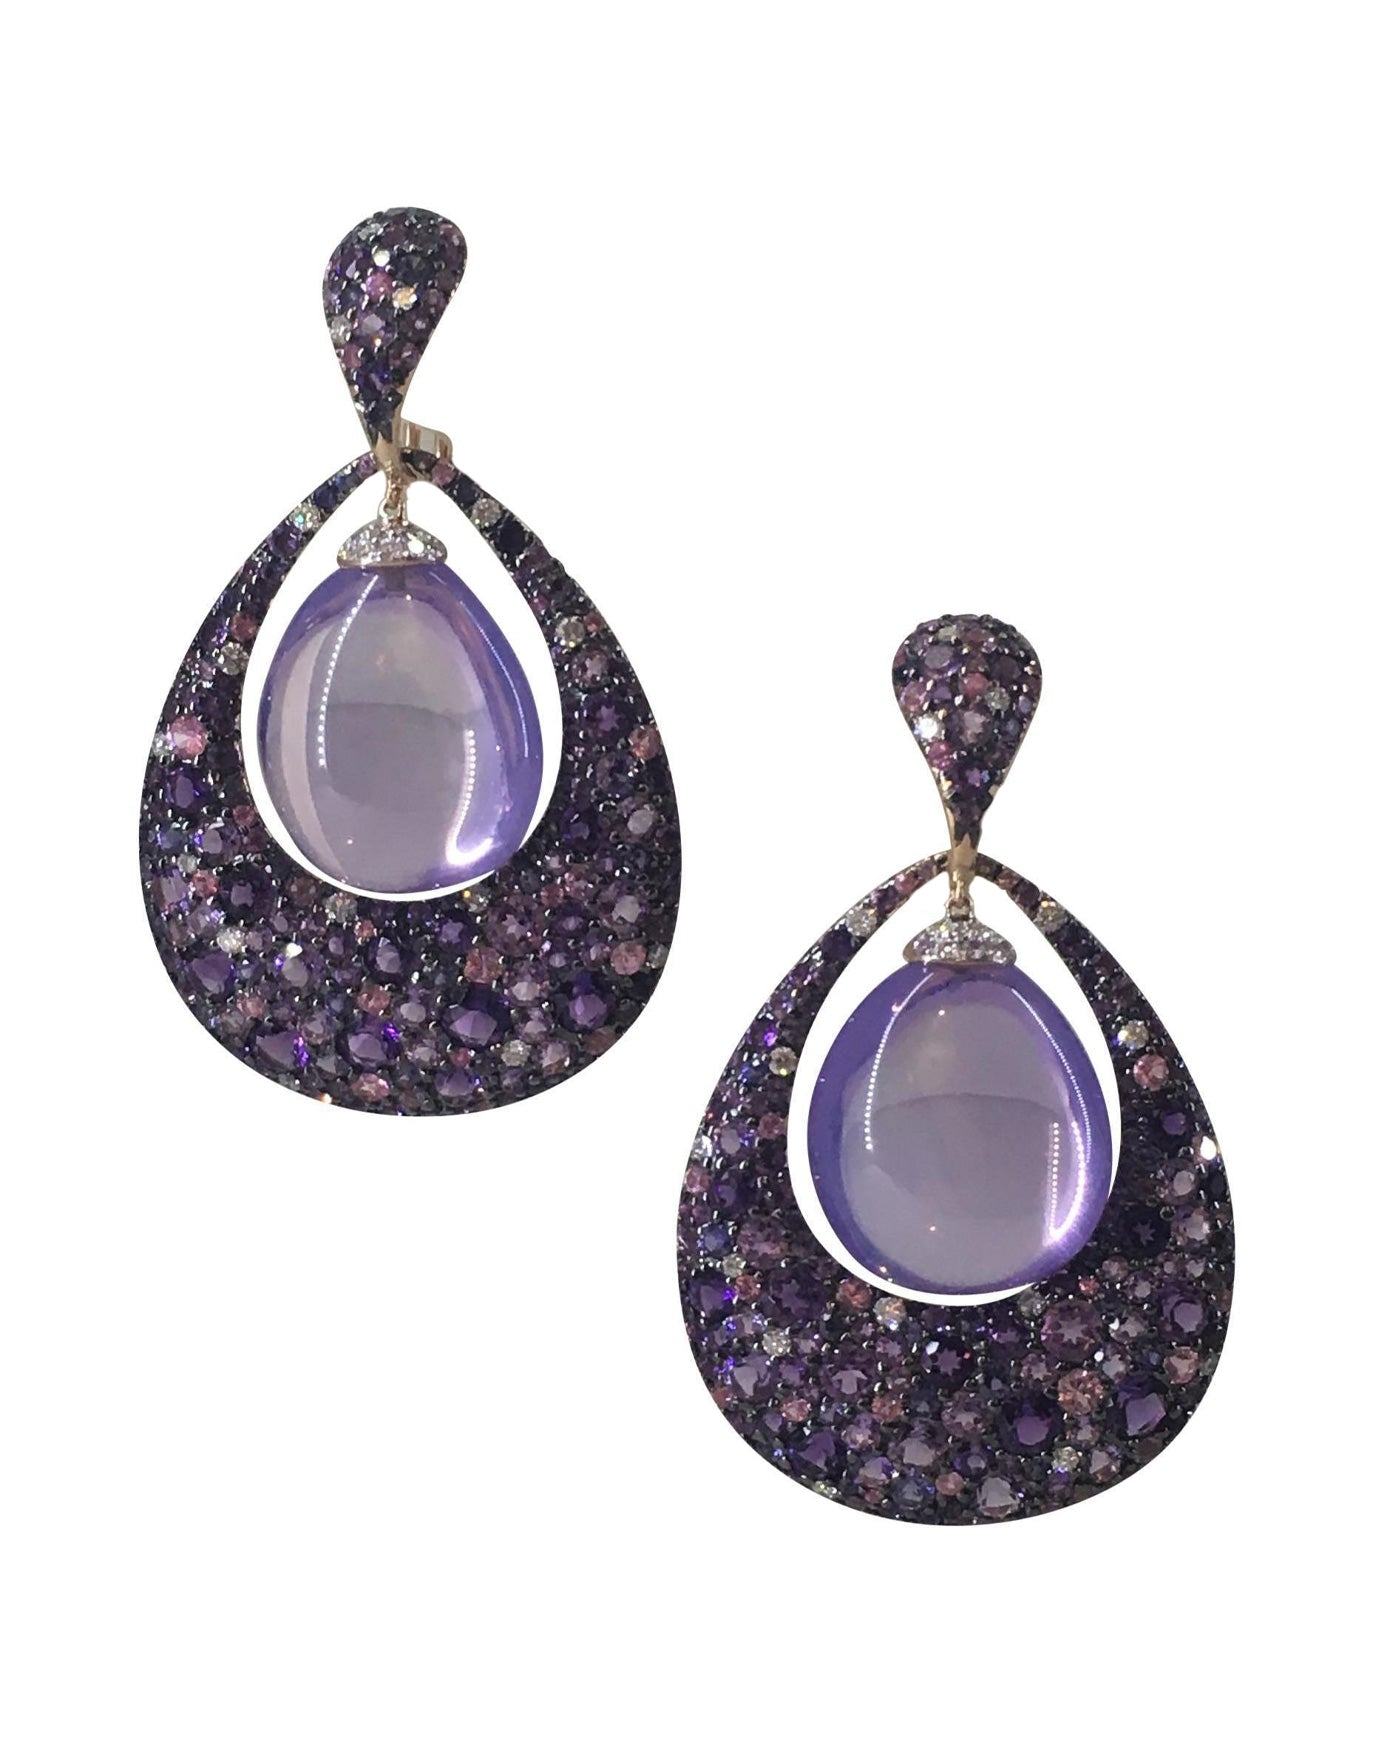 Irisbell purple moonstone drop earrings enhanced with diamonds, amethyst, pink and purple sapphires, crafted in 18 karat rose gold